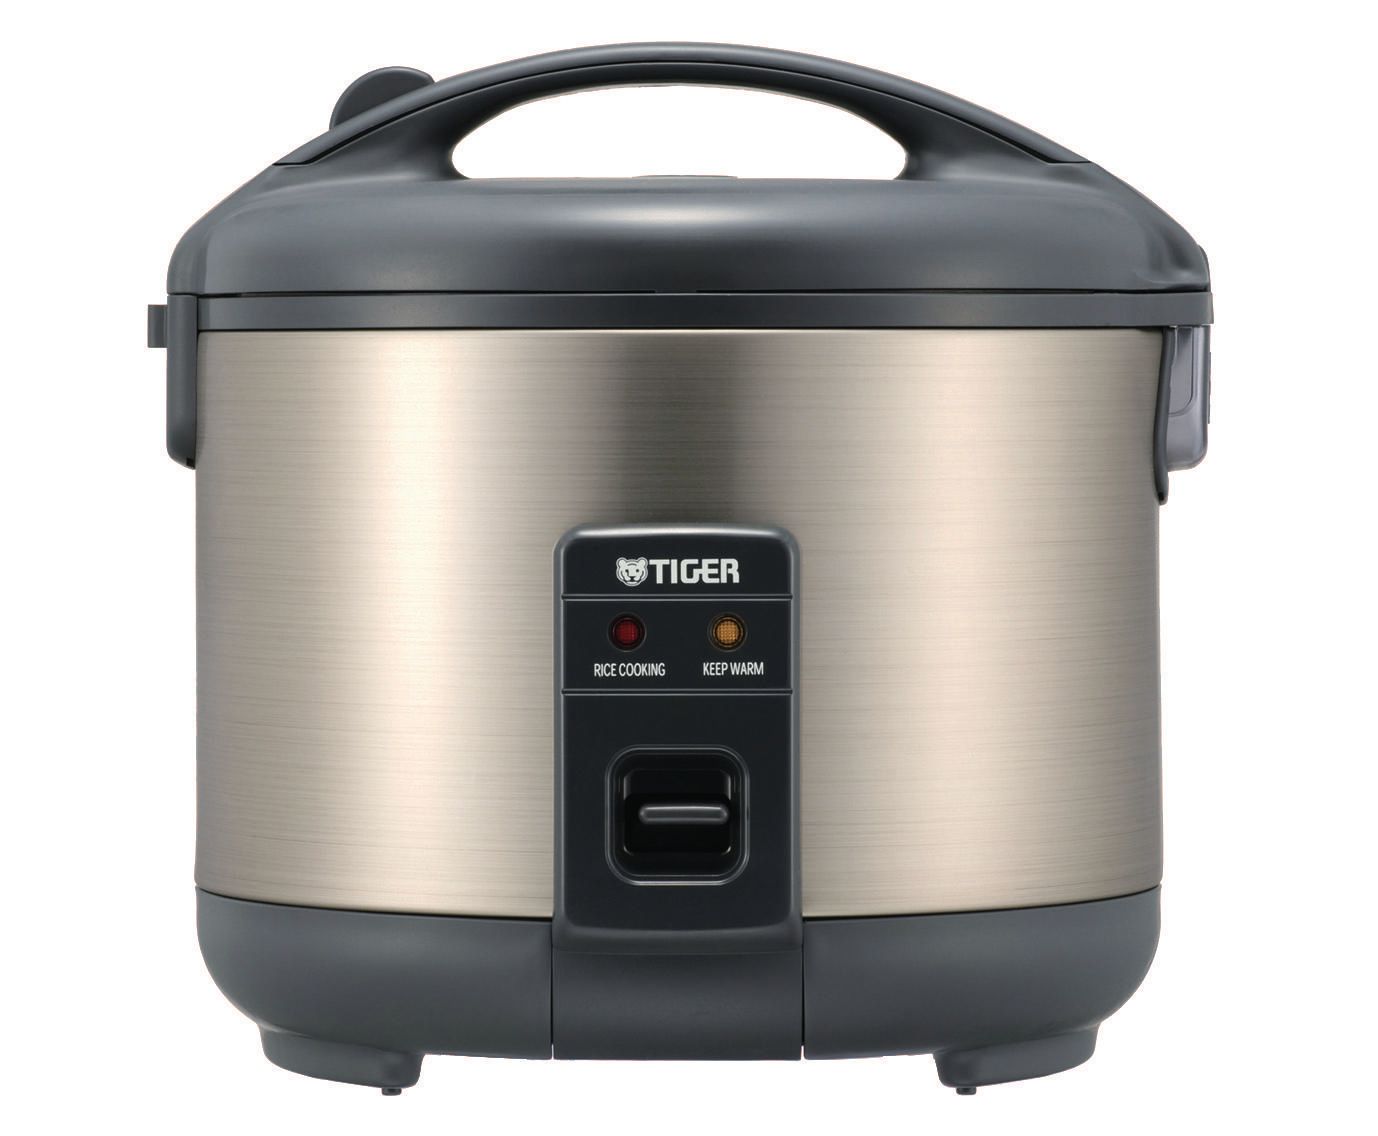 Tiger 10 Cup Electric Rice Cooker/Steamer